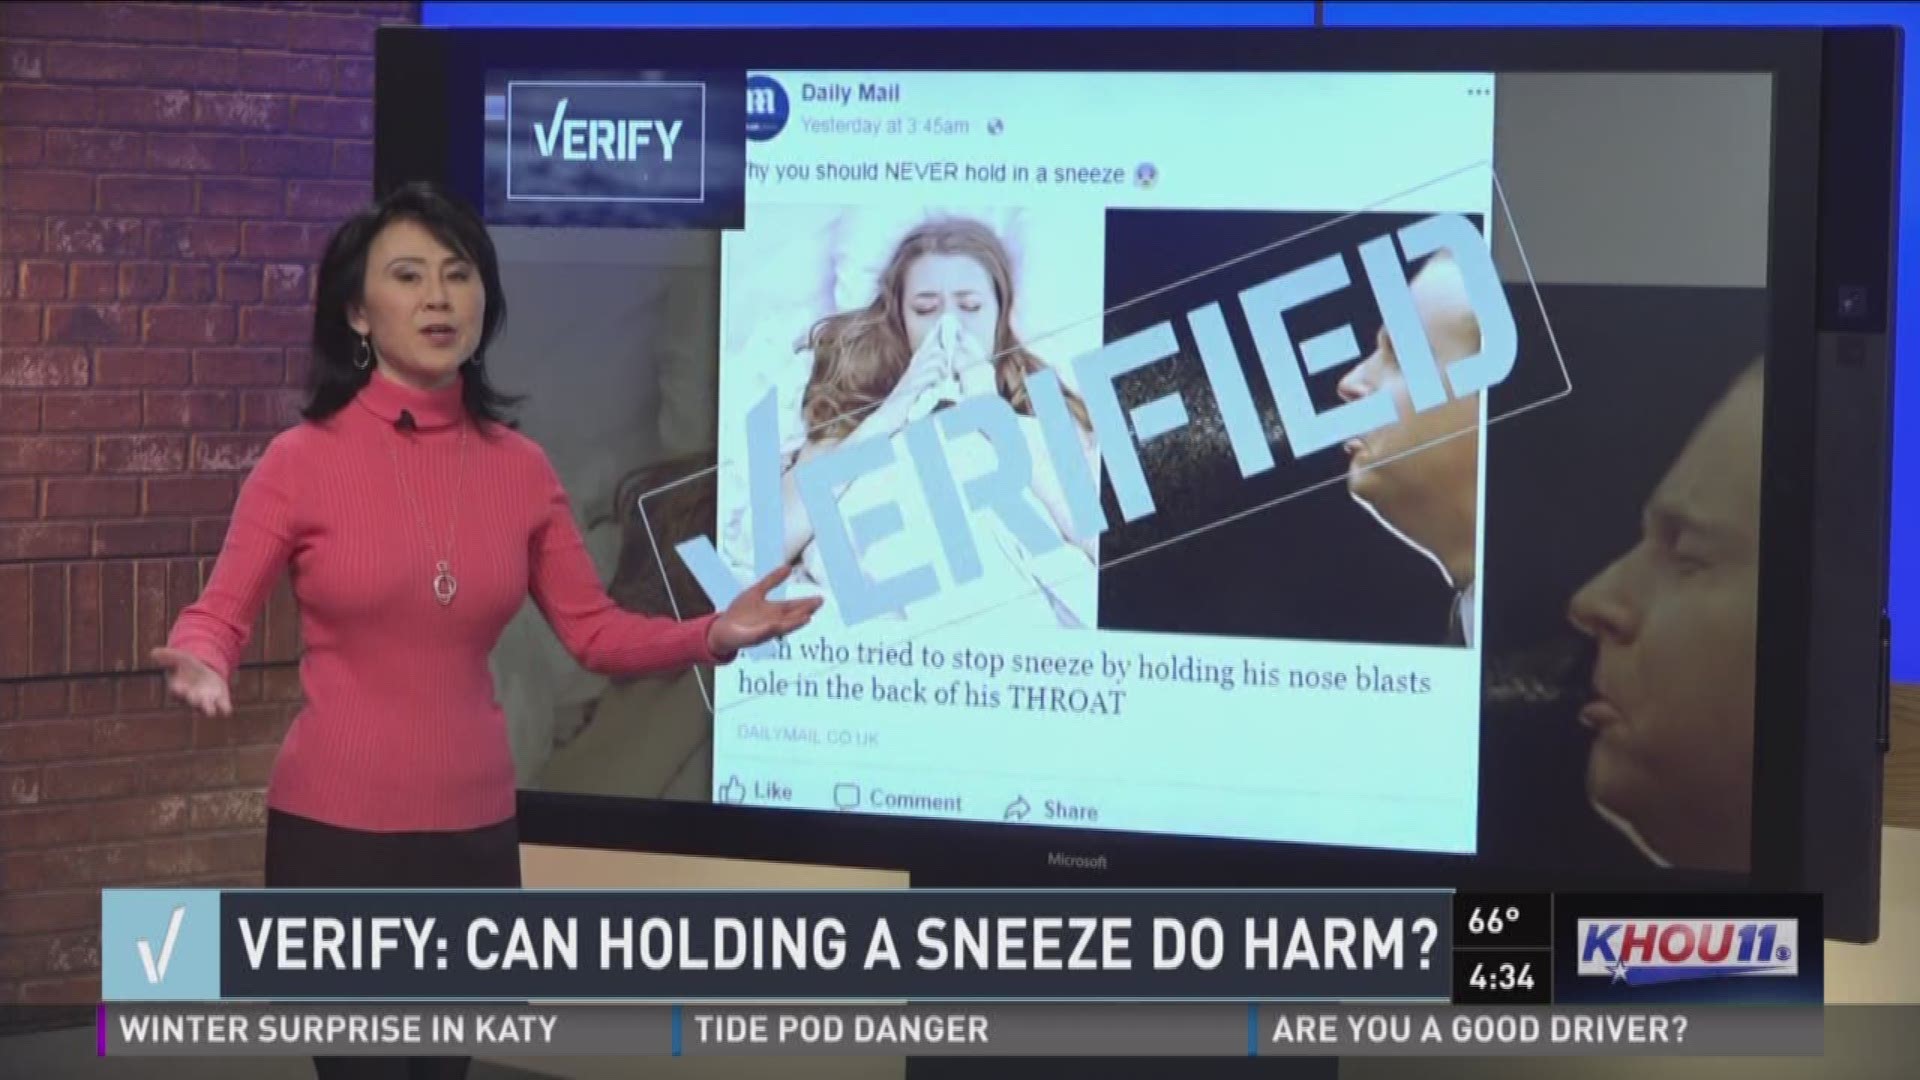 'Tis the season for sneezin' thanks to a flu outbreak and allergies. Your mom may have warned you never to hold your sneeze, but can it really cause harm. Our Verify researchers tracked down the truth.